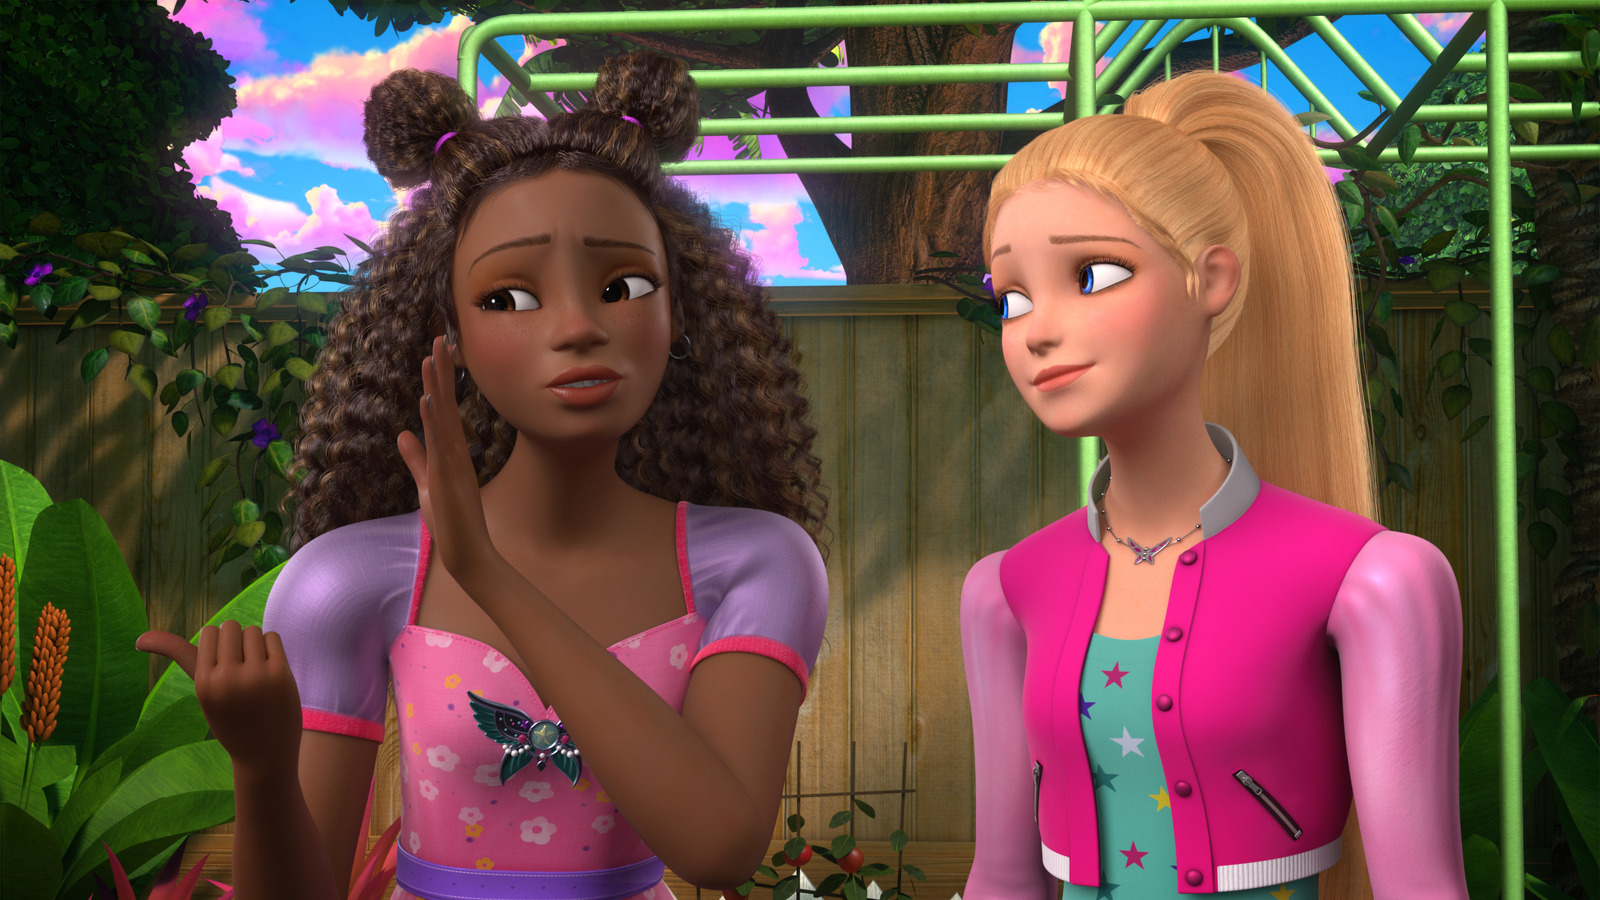 The New Barbie Series Coming To Netflix Continues The 'Cultural Phenomenon